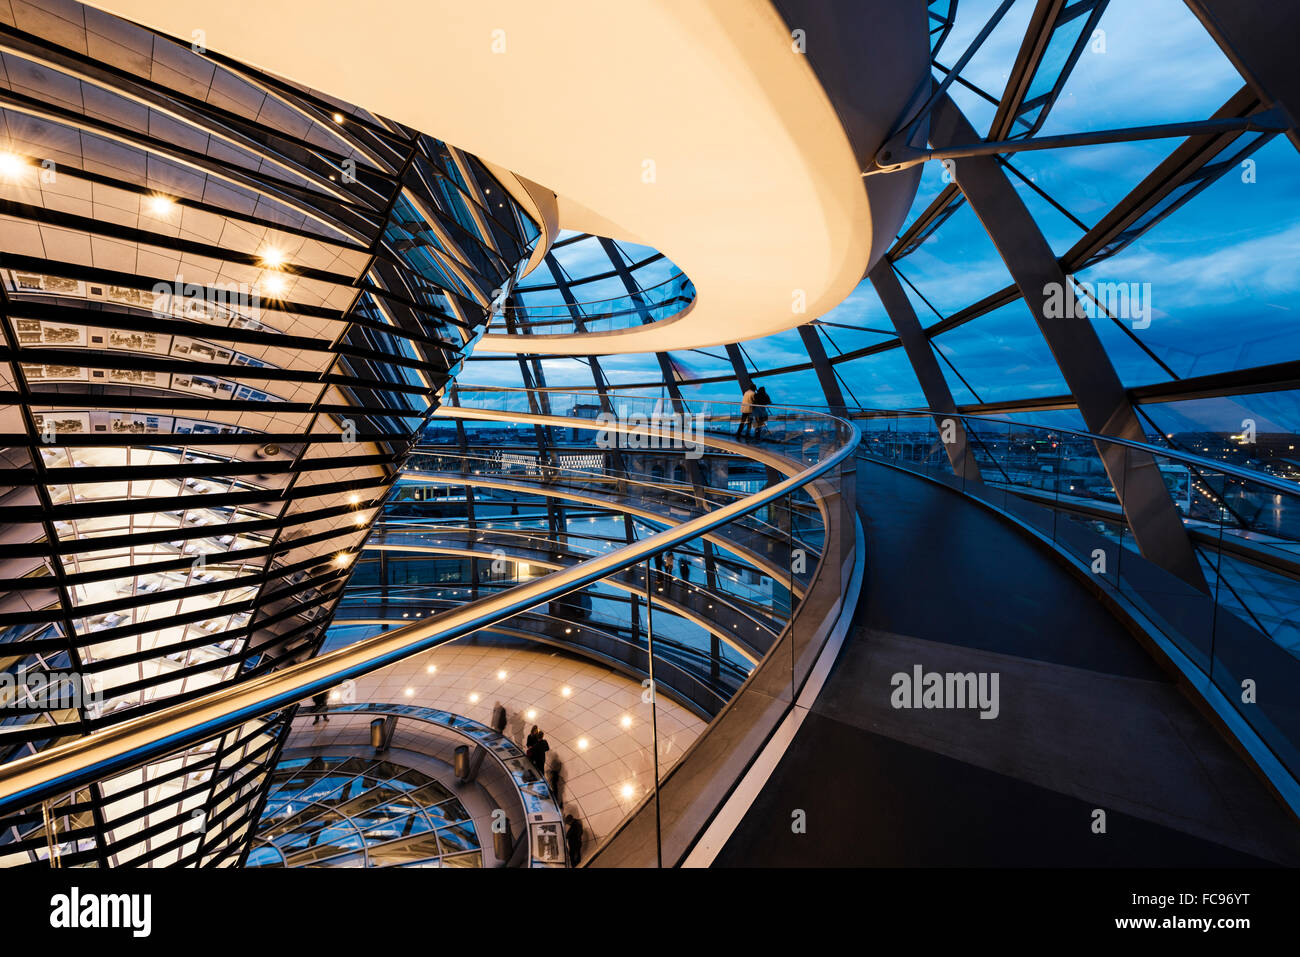 Wide angle interior view of The Dome of the Reichstag building at night, designed by Sir Norman Foster, Berlin, Germany, Europe Stock Photo